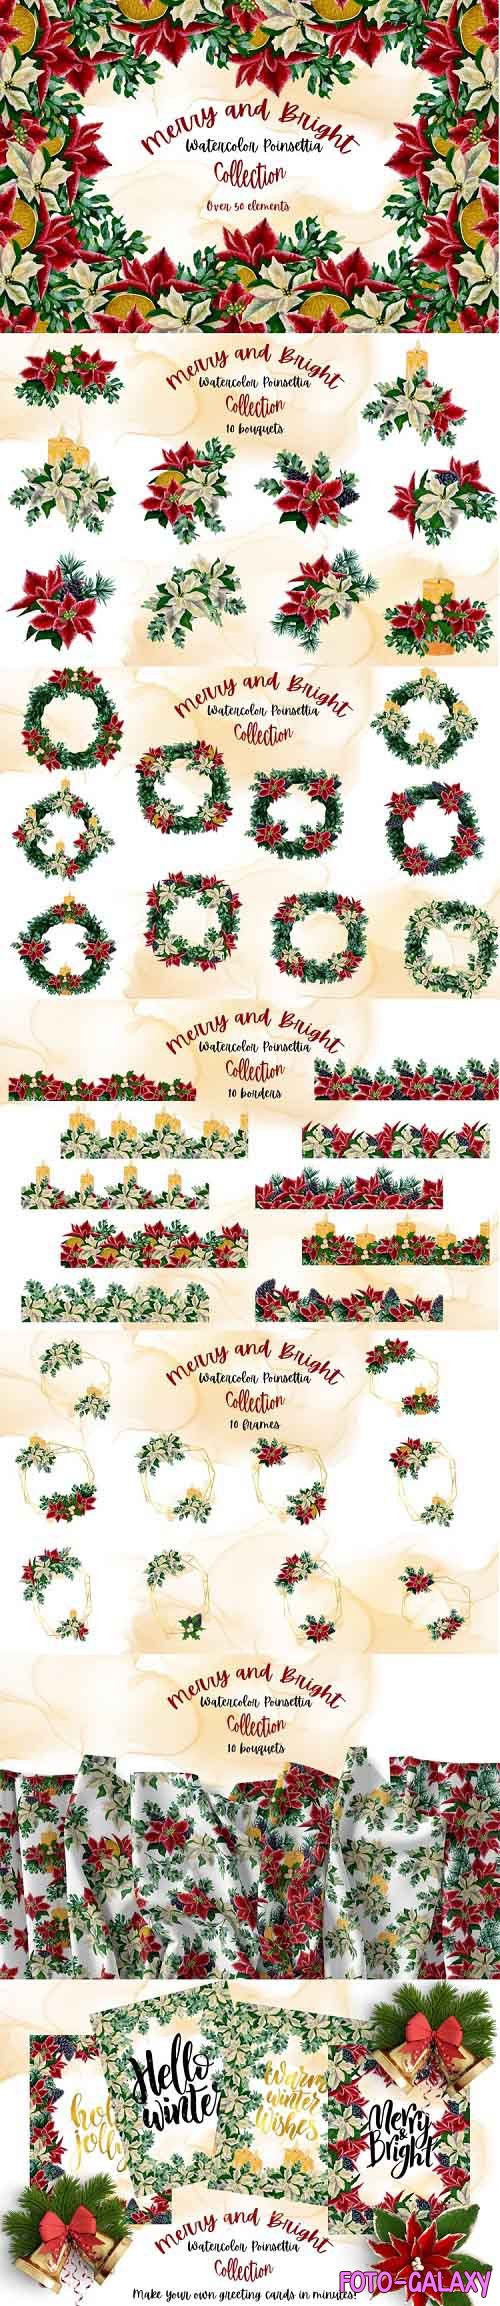 Merry and Bright - Watercolor Poinsettia Collection - 1014543